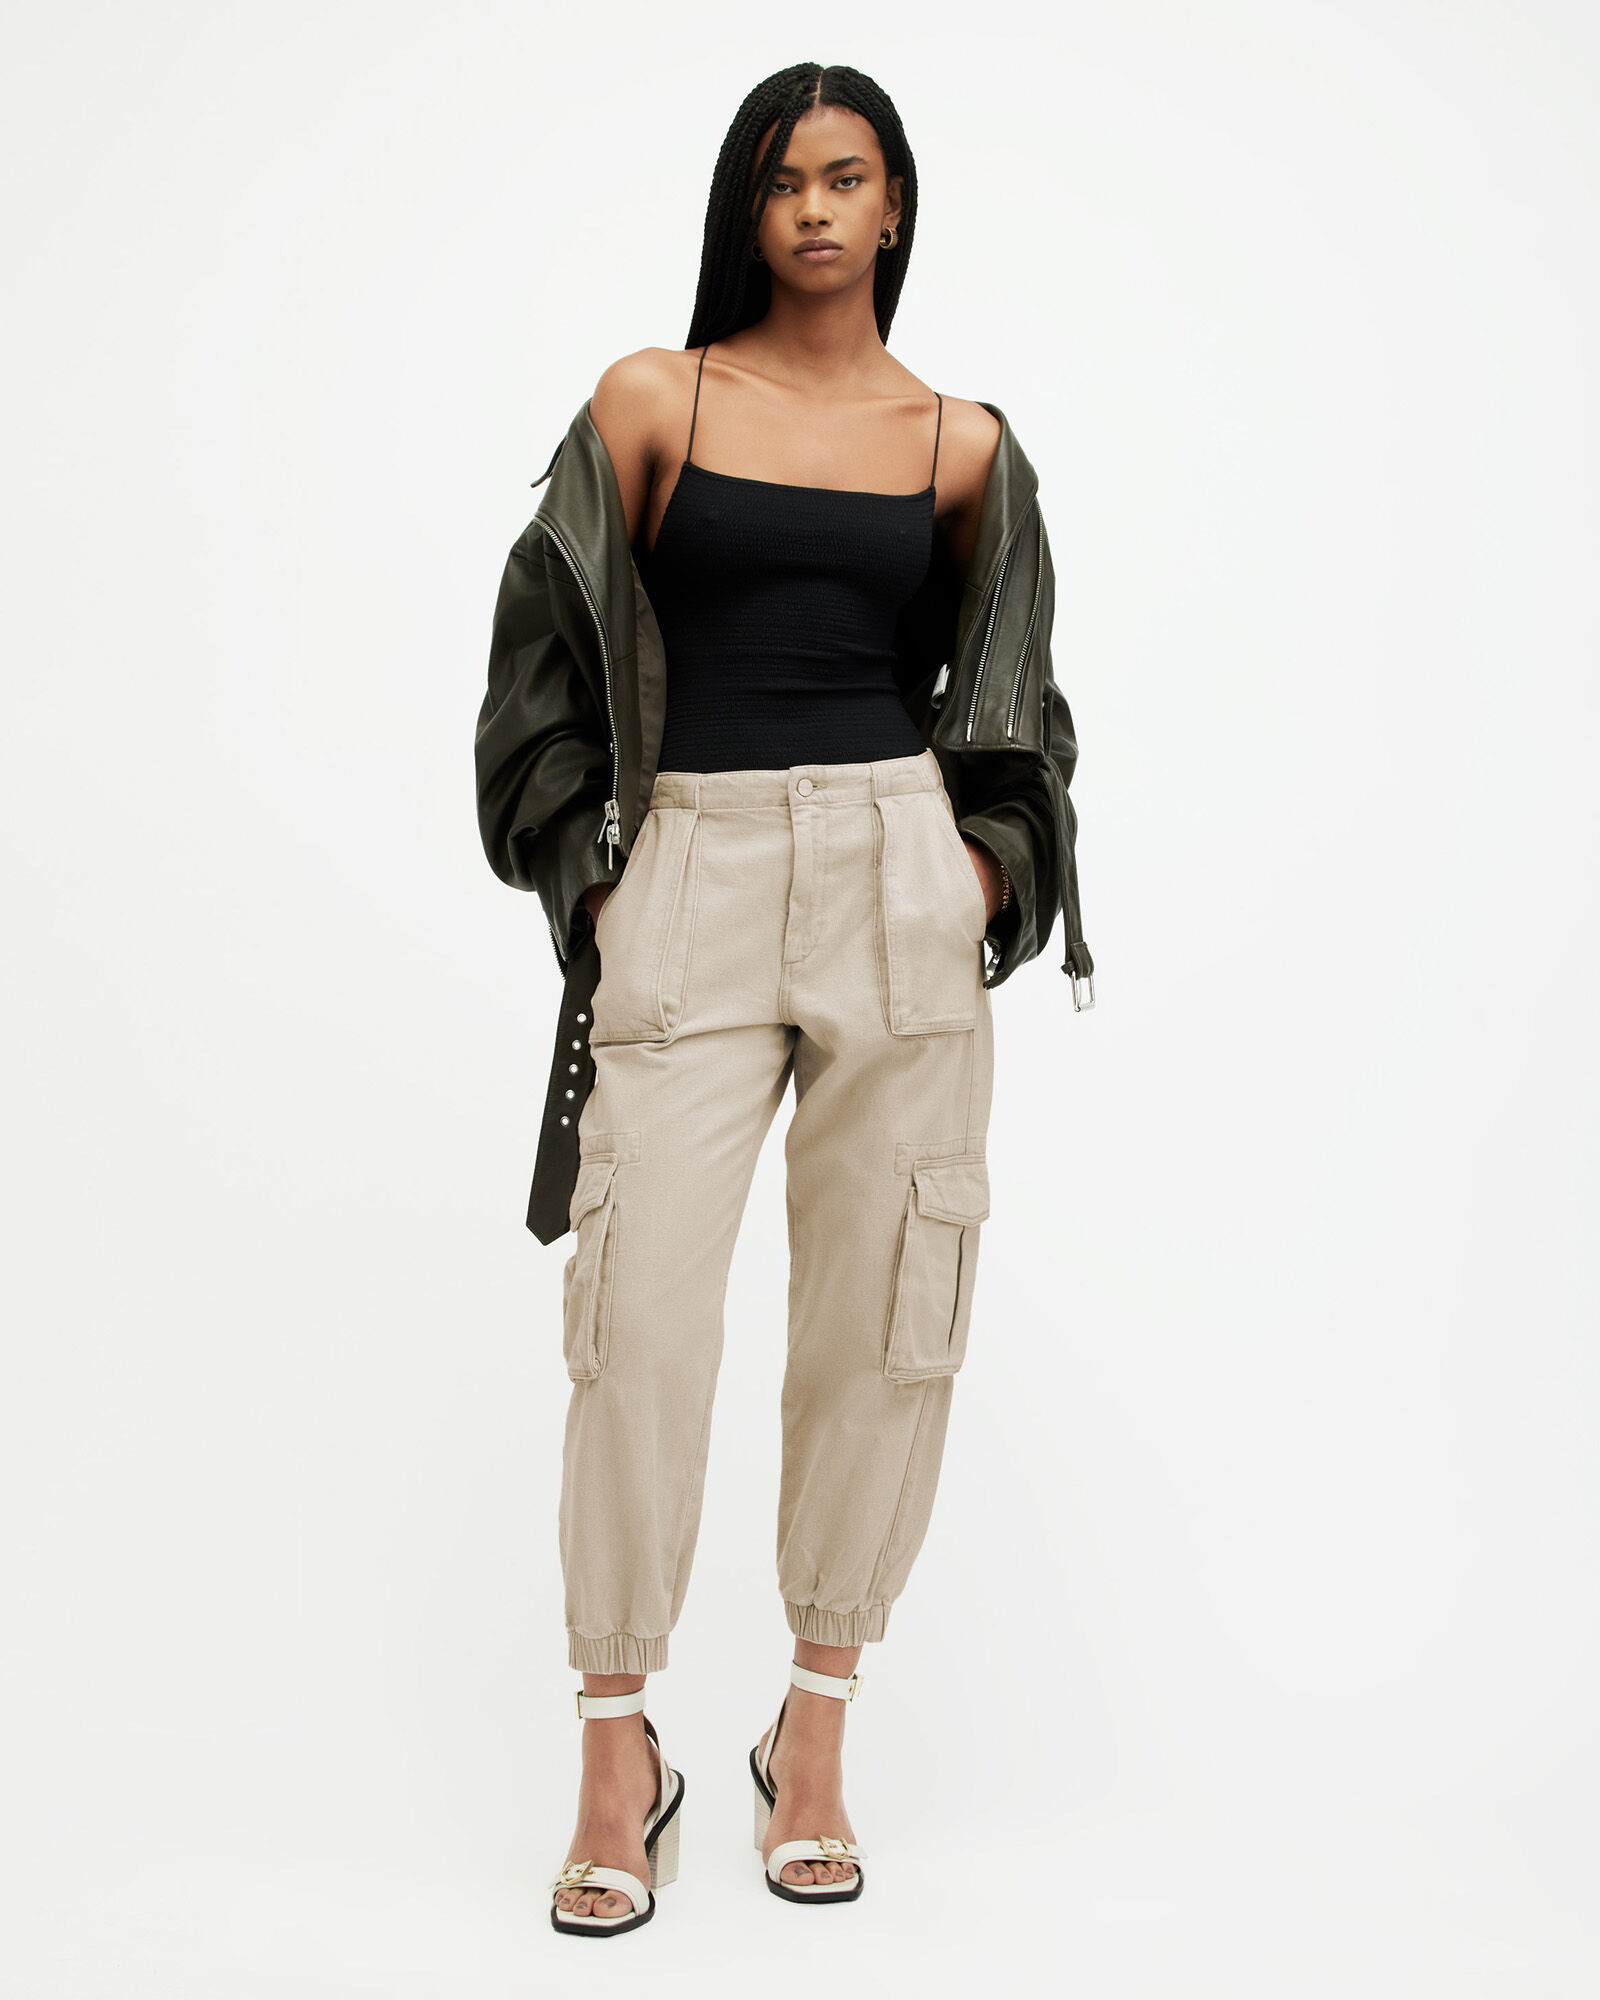 Ydkzymd Loose Fit Flare Sweatpants Women High Waist for Workout Travel  Pants for Women on Plane Solid Color Drawstring Trousers Sport Palazzo  Jogging with Pockets Pants Khaki 2XL - Walmart.com